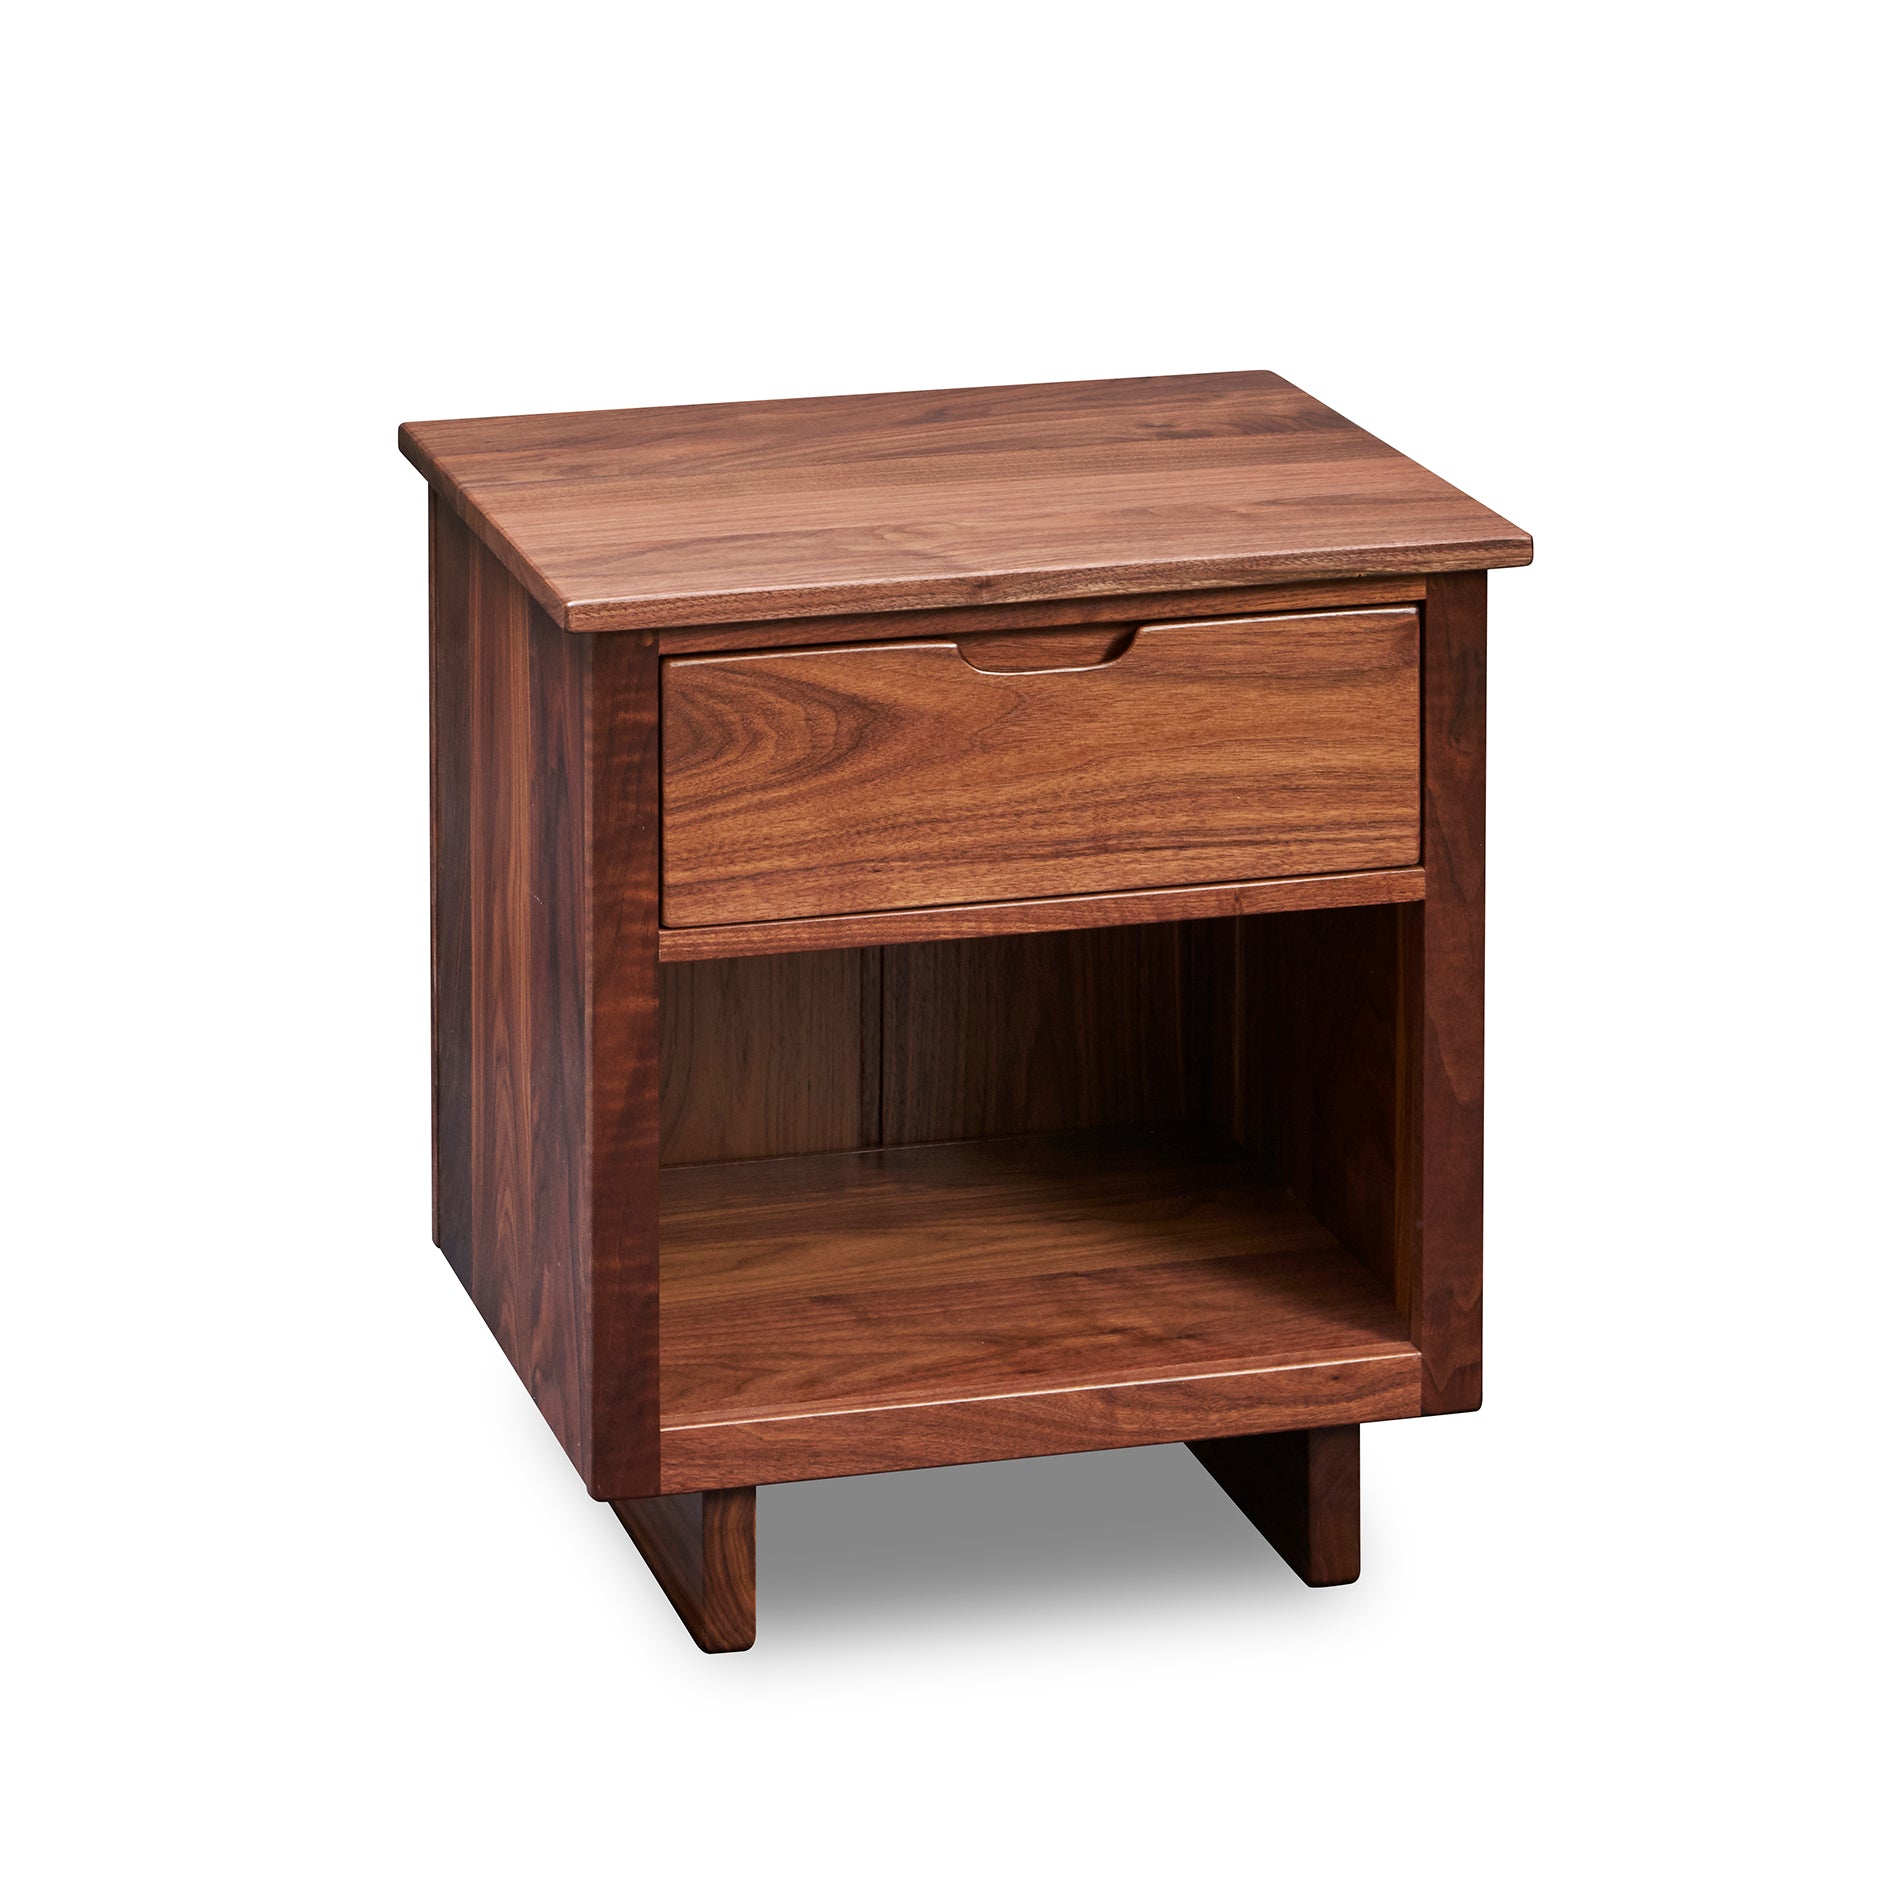 One drawer Foundation Nightstand in solid walnut wood with trestle base and built in drawer pull